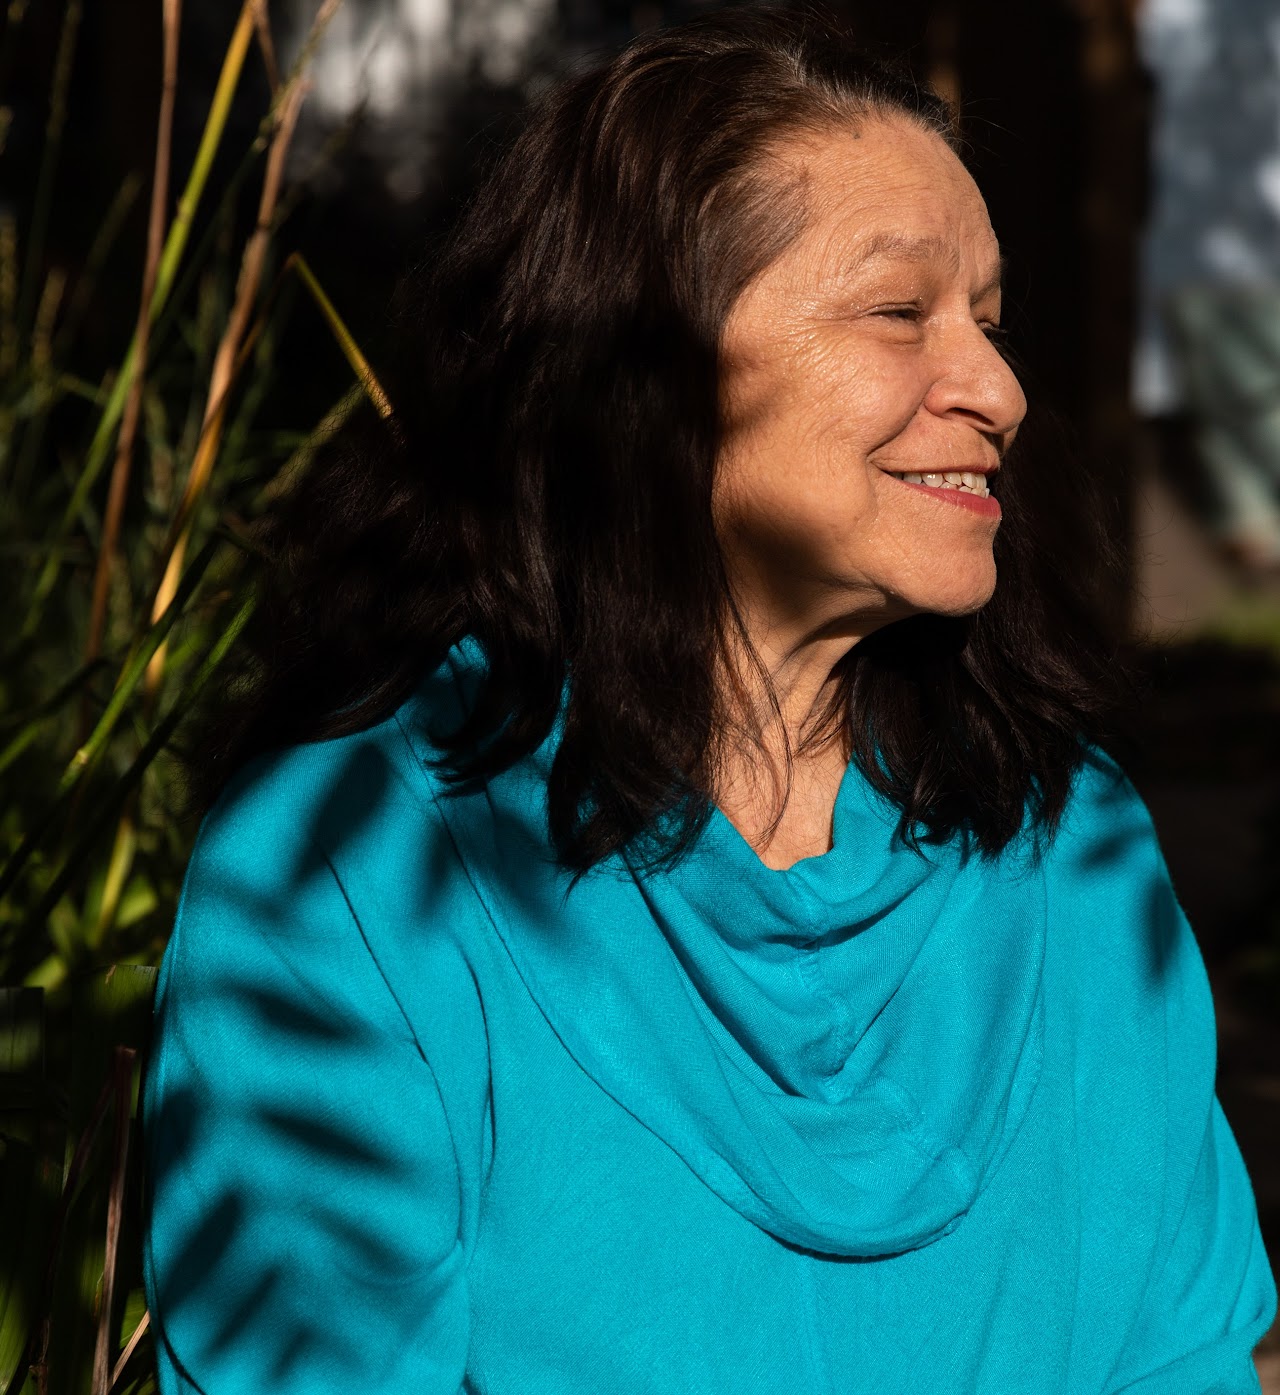 Photo of Marcie Rendon smiling, wearing a turquois colored shirt